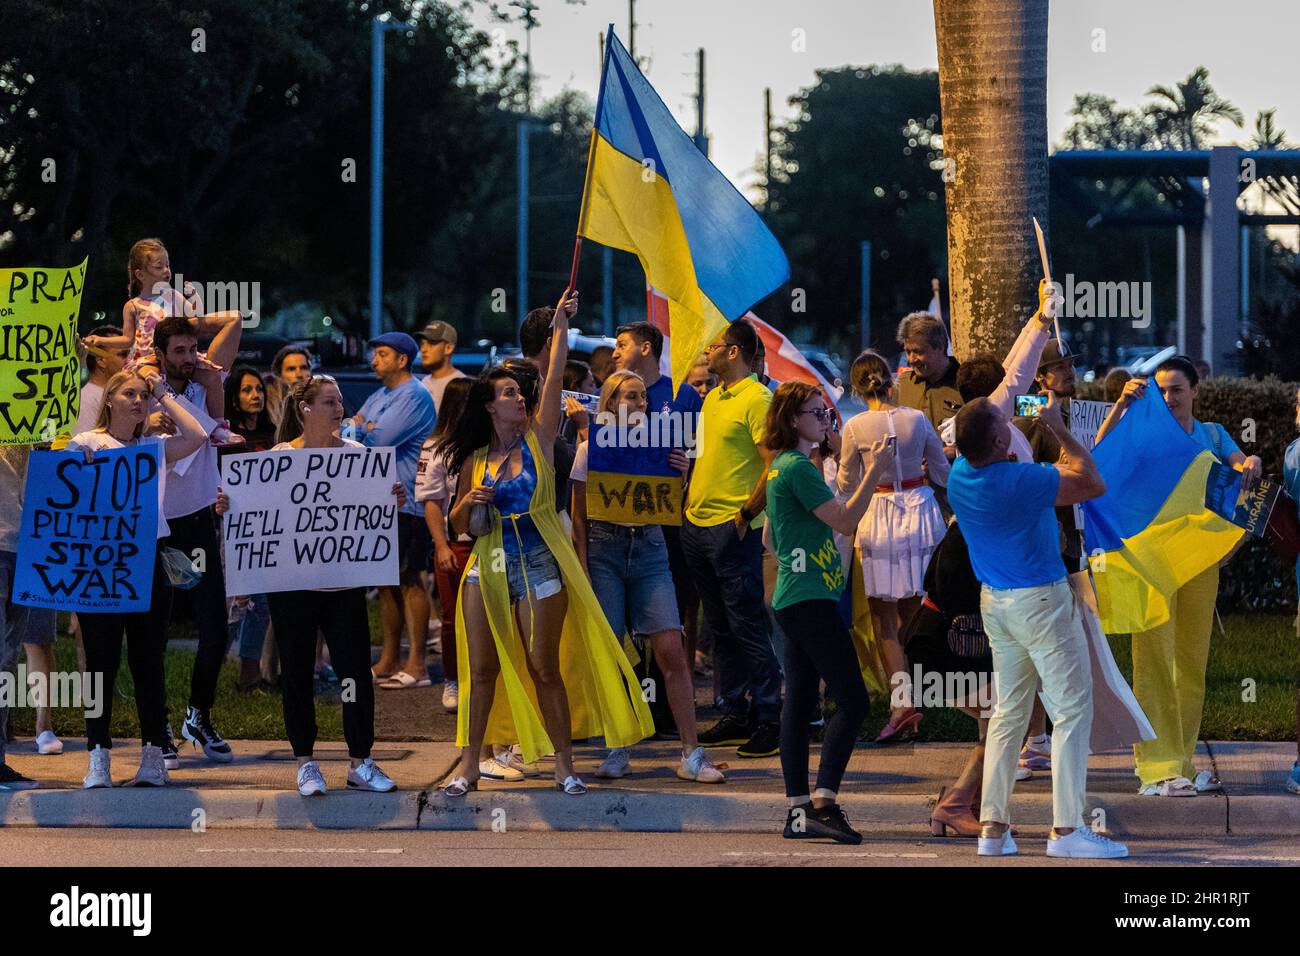 Hallandale, Florida, USA. February 24th 2022. Miami: Ukraine War Protest. Protest against Russian invasion of Ukraine. Some Ukrainians people in Miami, Sunny Isles Beach, Boca Raton, South Beach protest against Russian army invasion to Ukraine. Ukraine War Protest signs and posts. Credit: Yaroslav Sabitov/YES Market Media/Alamy Live News Stock Photo